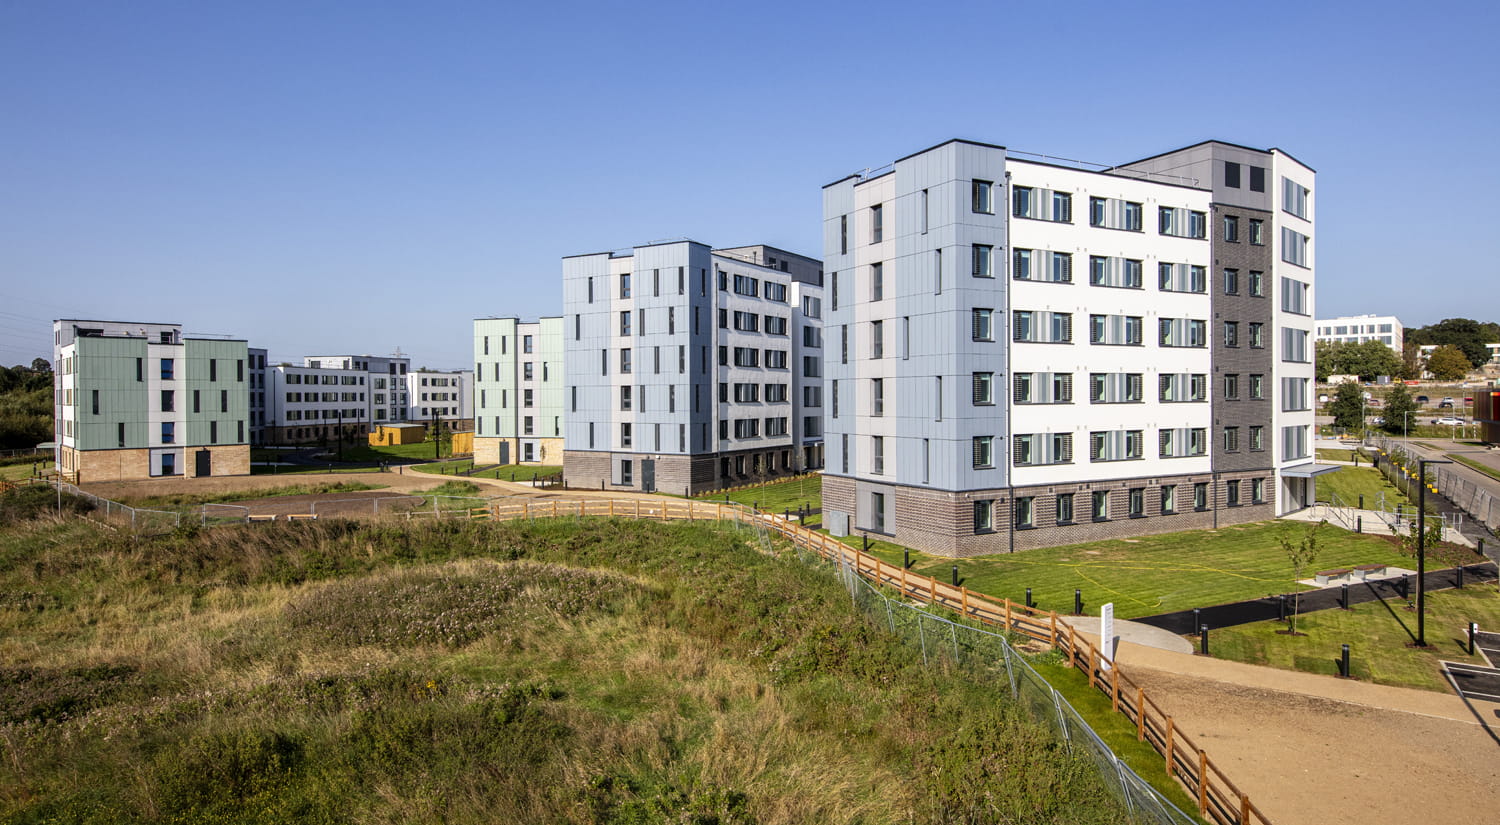 Pastures student accommodation outside